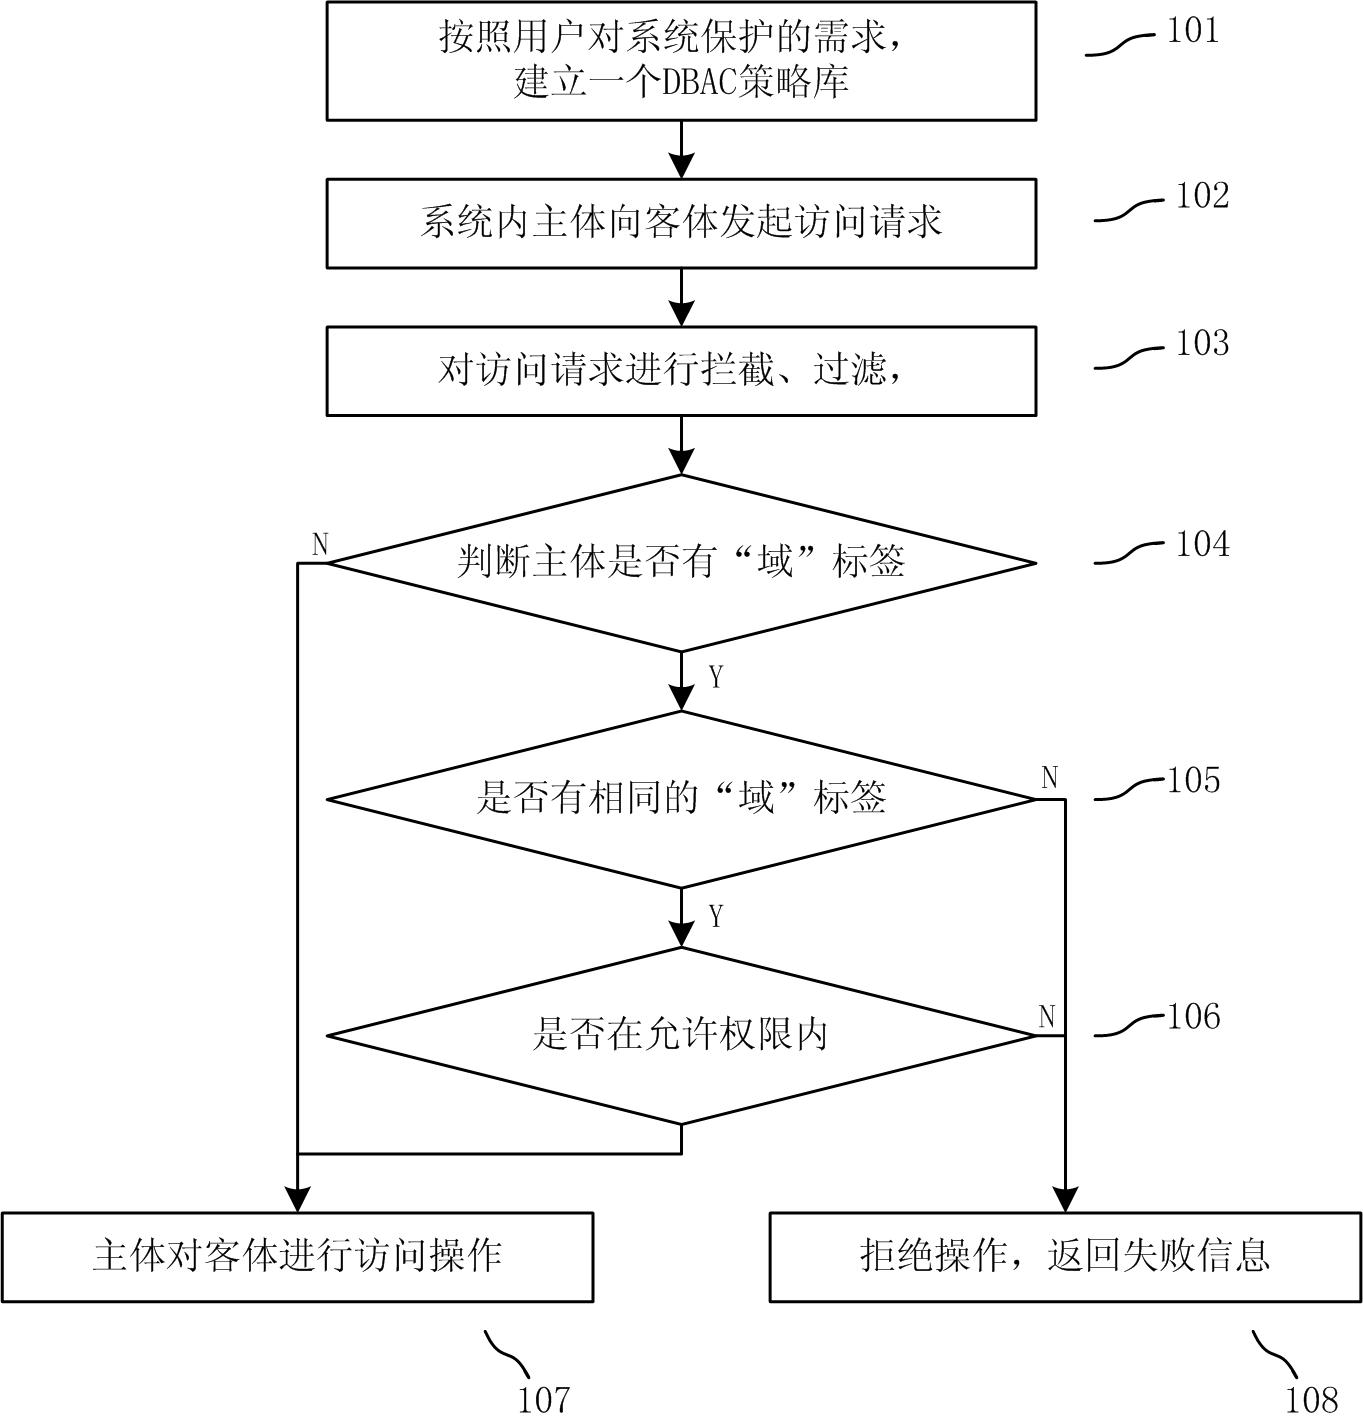 Domain-based access control method and system